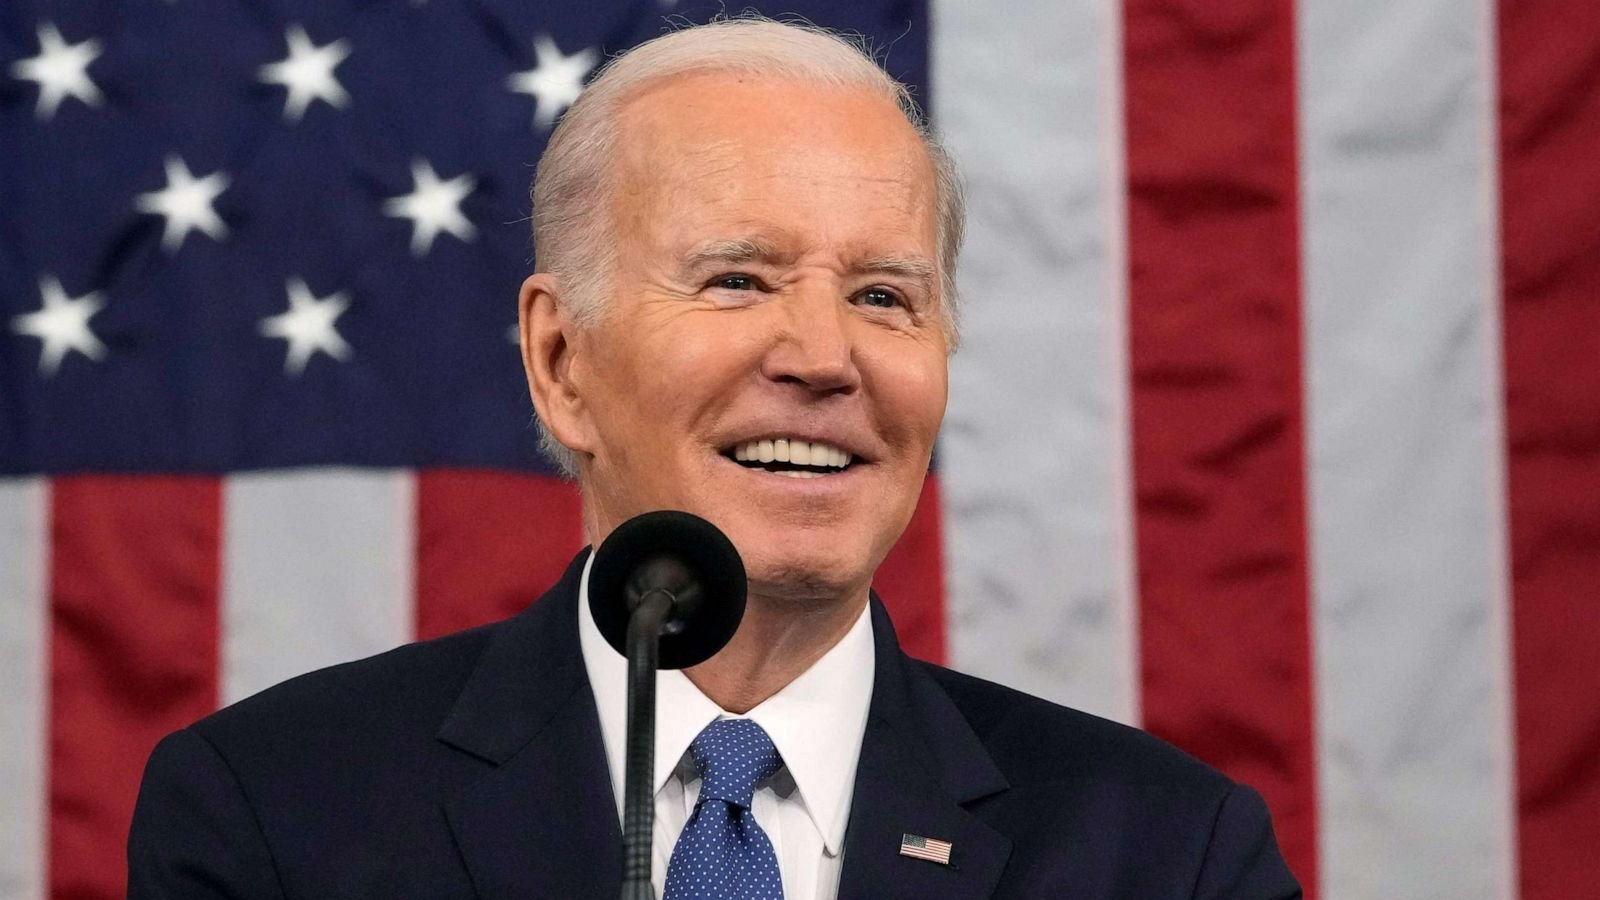 State of the Union live updates and analysis: Biden says 'the soul of this nation is strong'